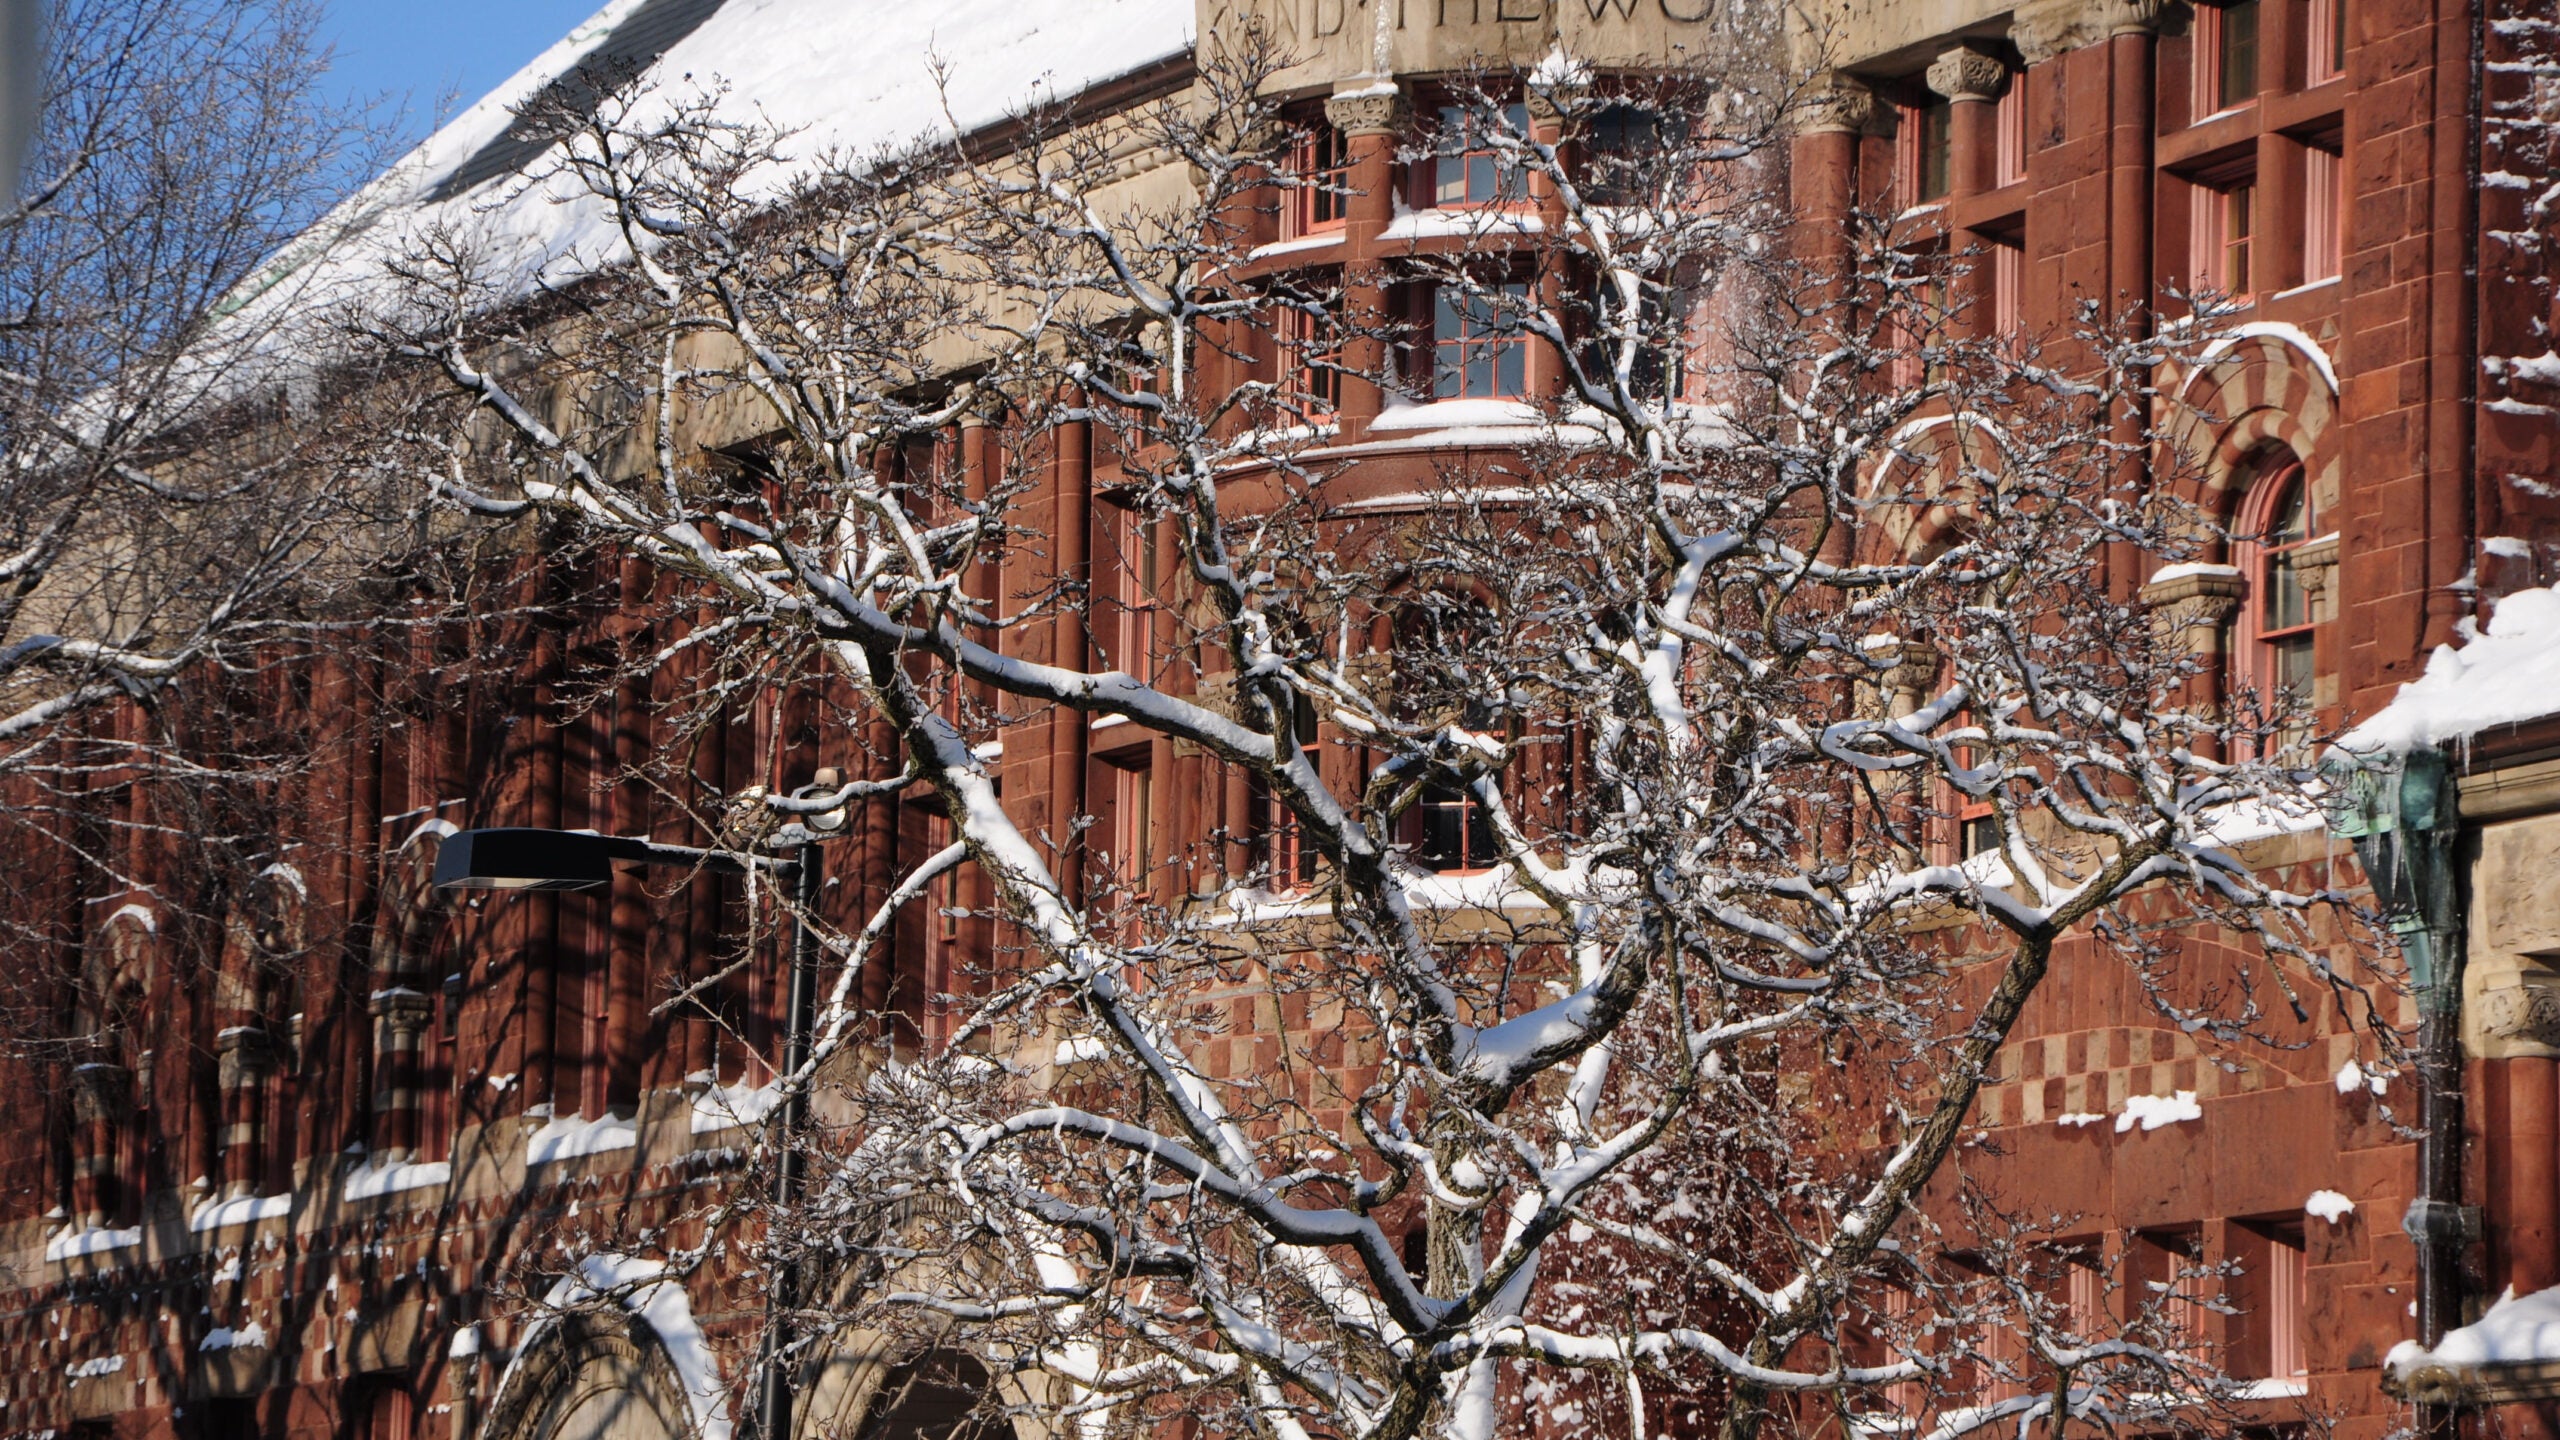 Red brick campus building with a snow covered tree in front